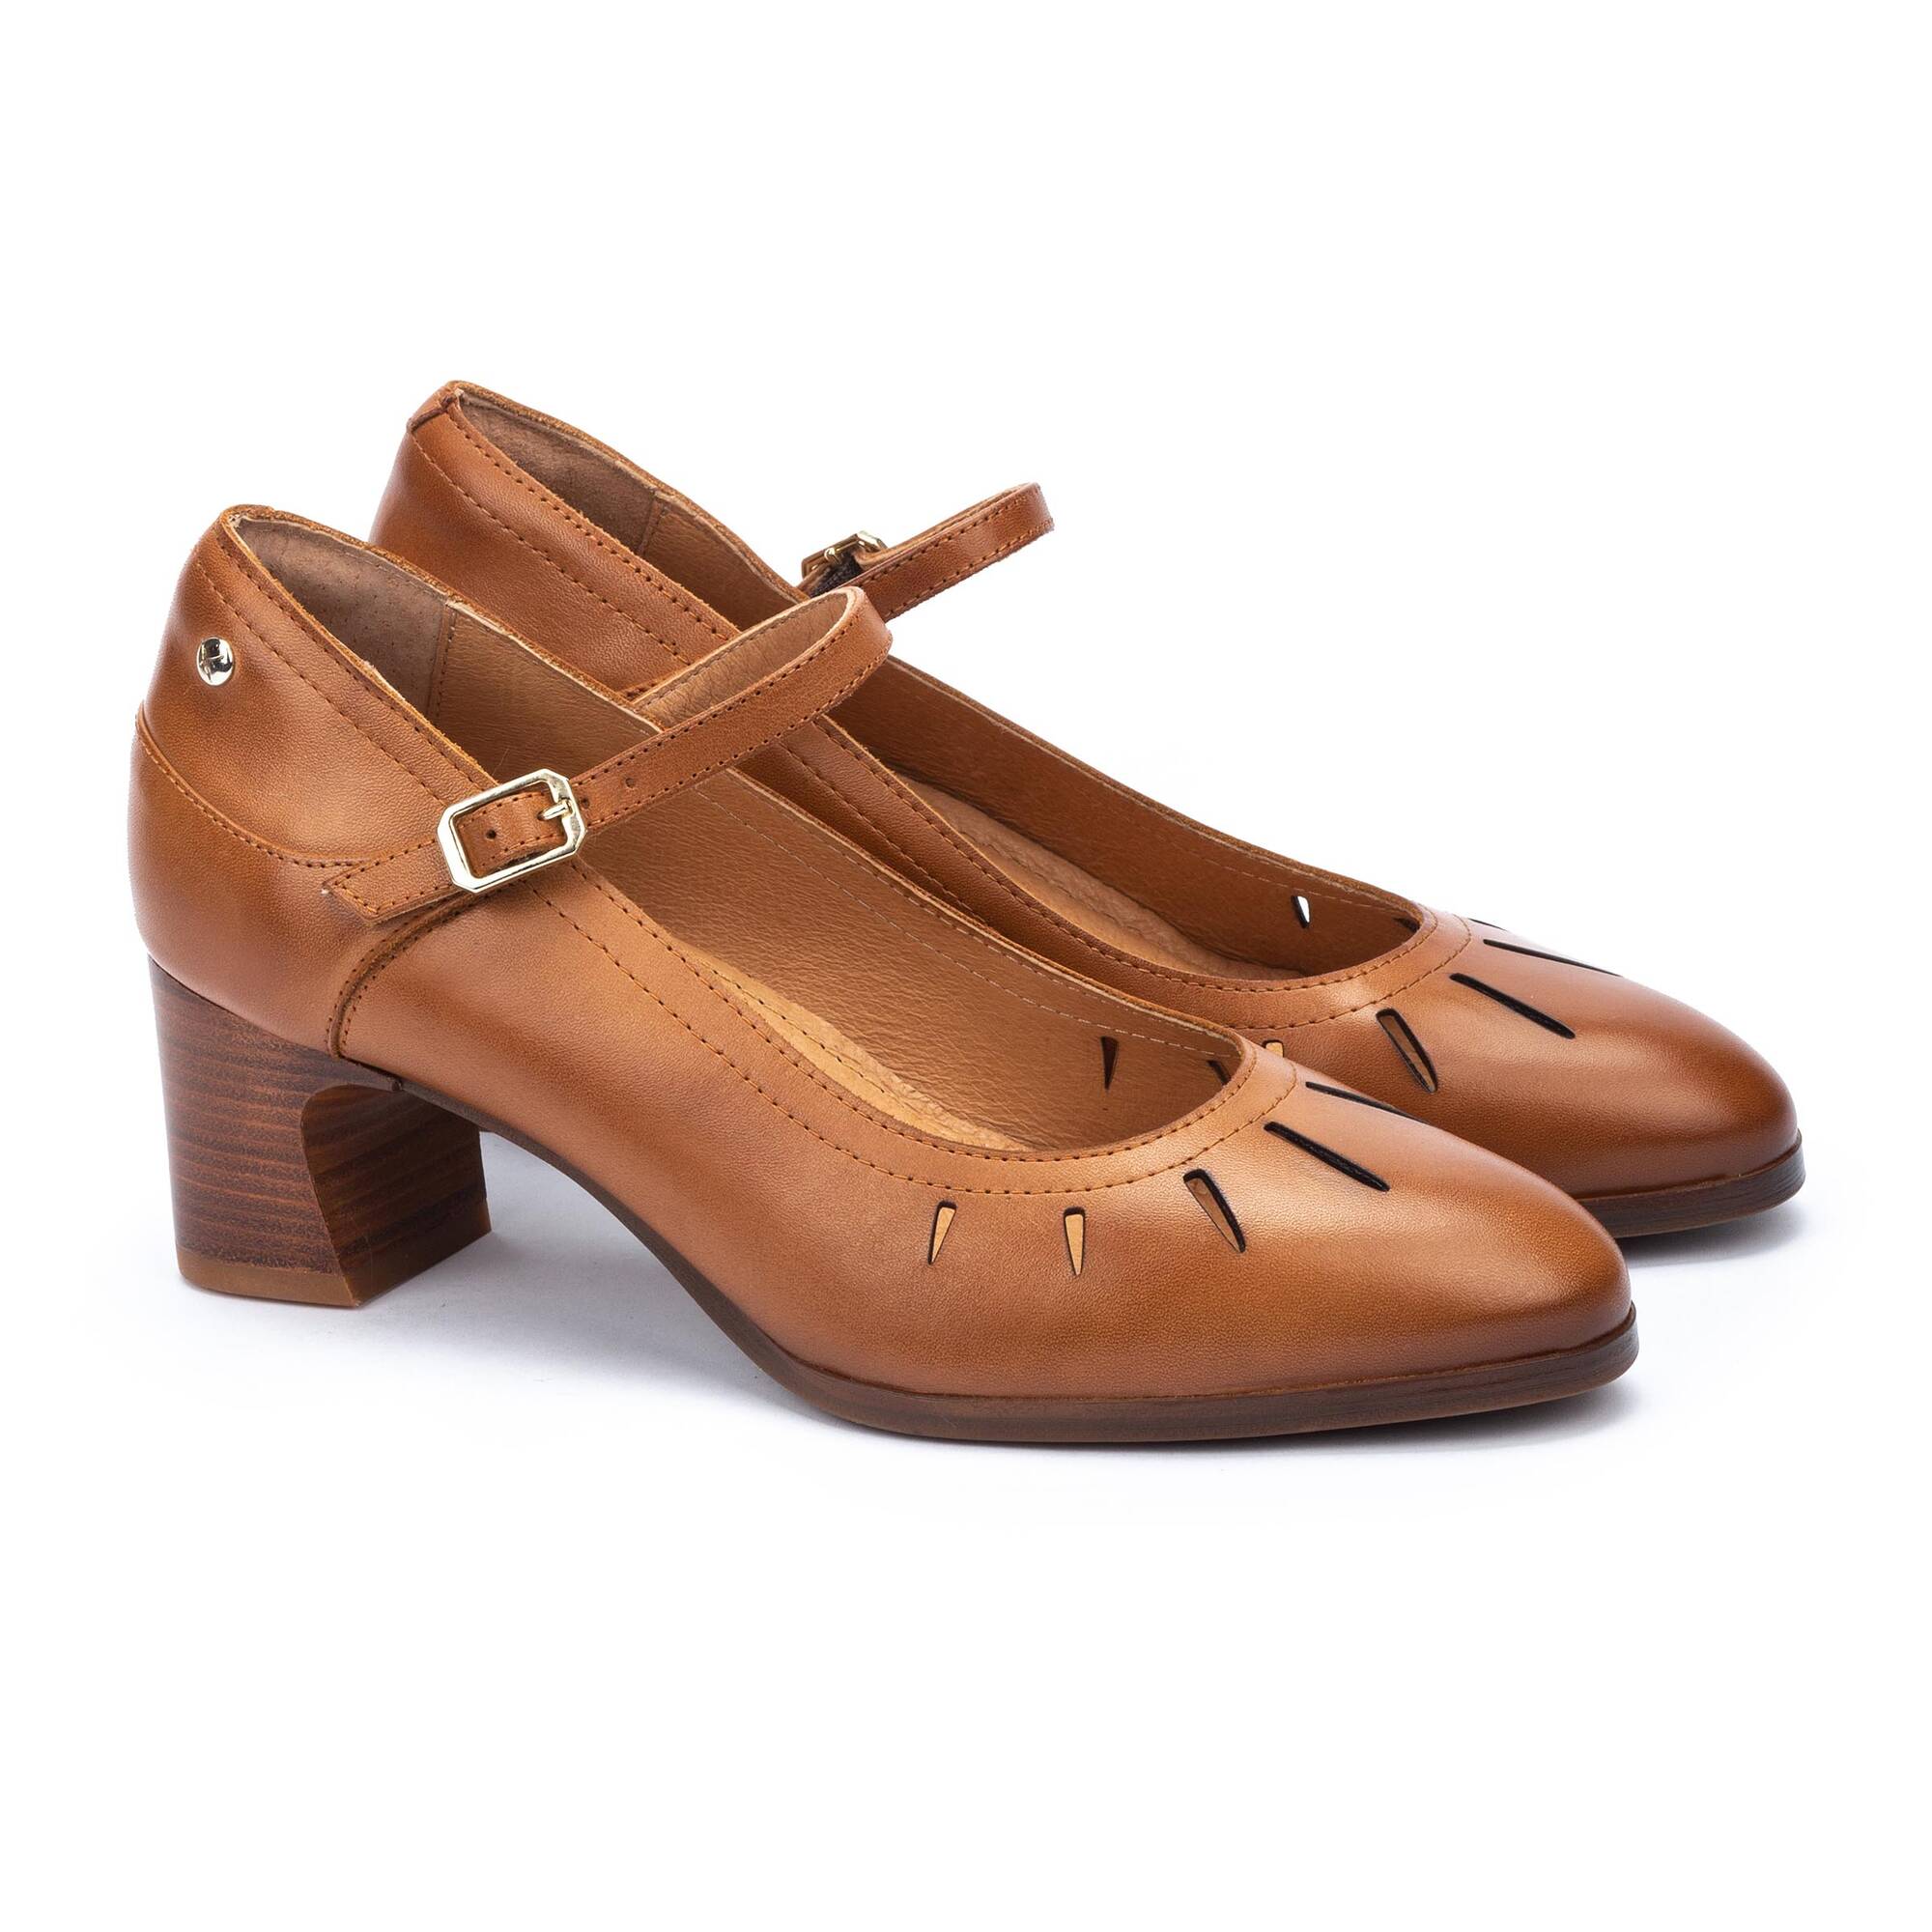 Chaussures à talon | LUGO W8P-5751, BRANDY, large image number 20 | null